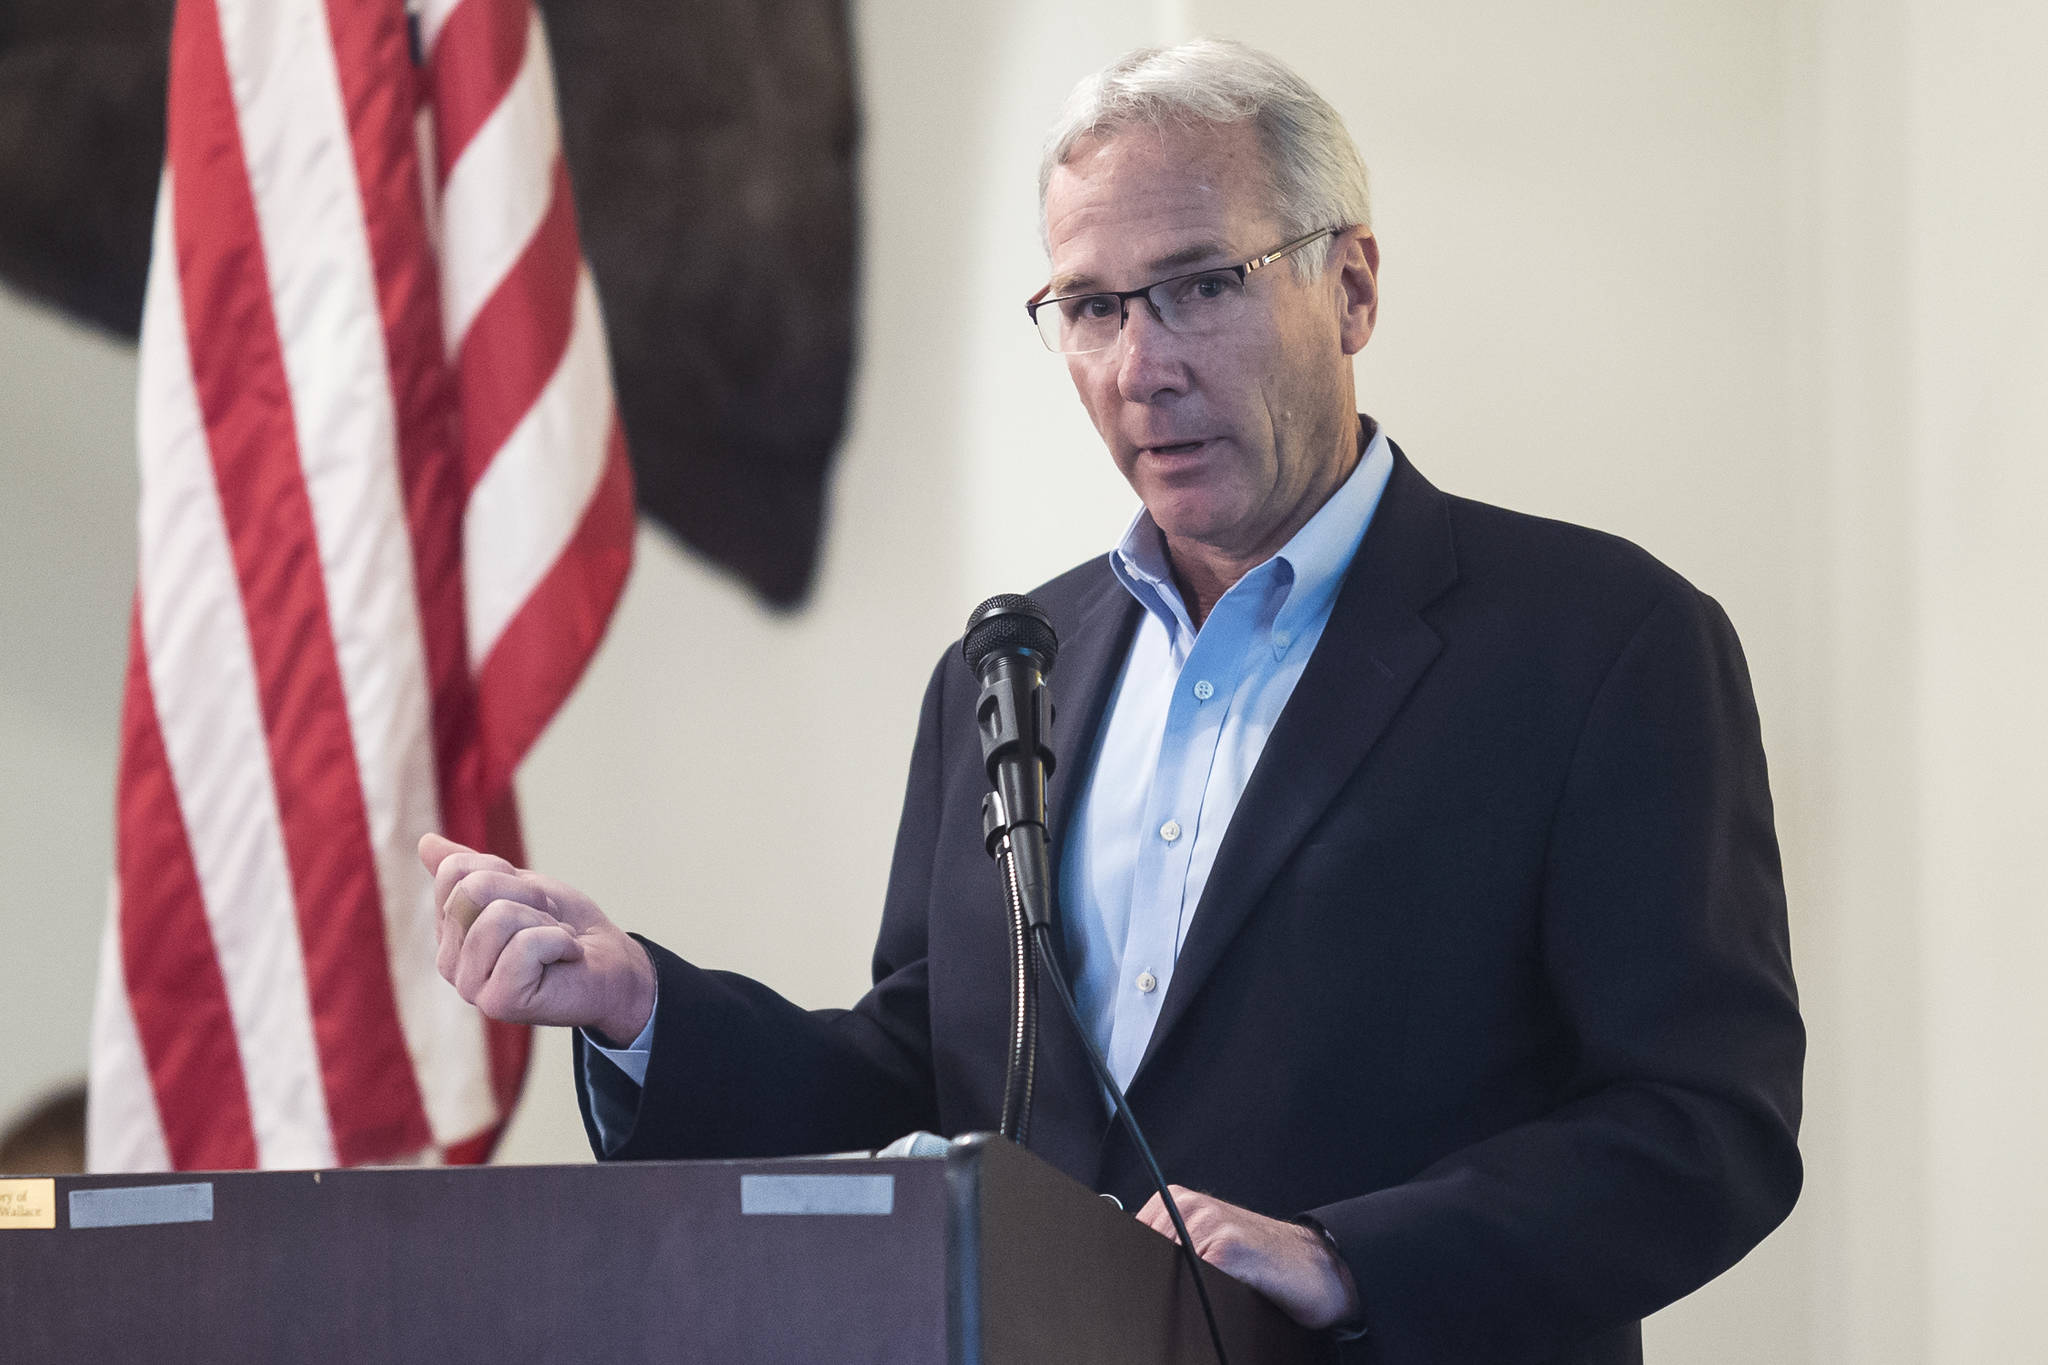 Scott Jepsen, Vice President of External Affairs & Transportation for ConocoPhillips, speaks to the Juneau Chamber of Commerce during its luncheon at the Moose Lodge on Thursday, Oct. 18, 2018. (Michael Penn | Juneau Empire)